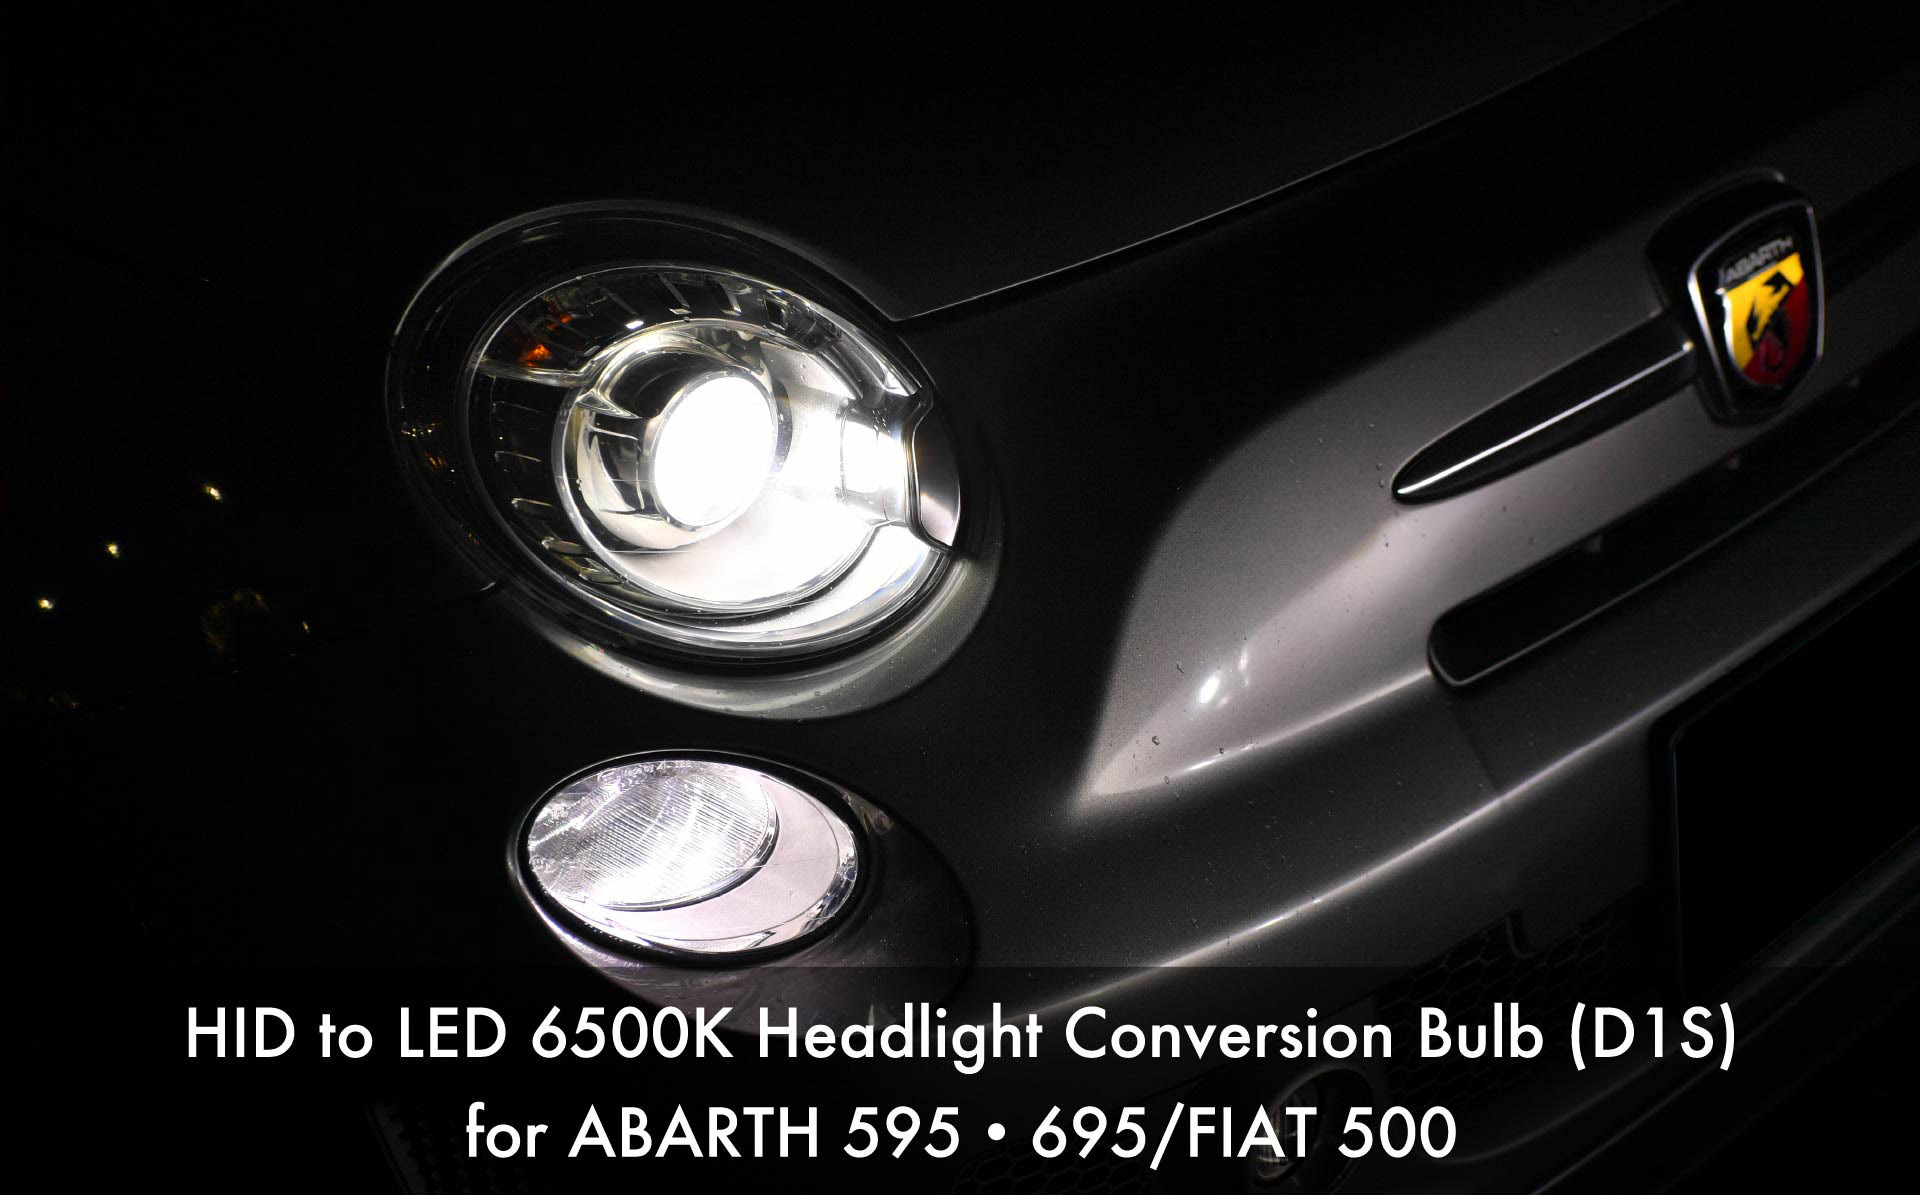 HID to LED 6500K Headlight Conversion Bulb (D1S) for ABARTH 595・695/FIAT 500